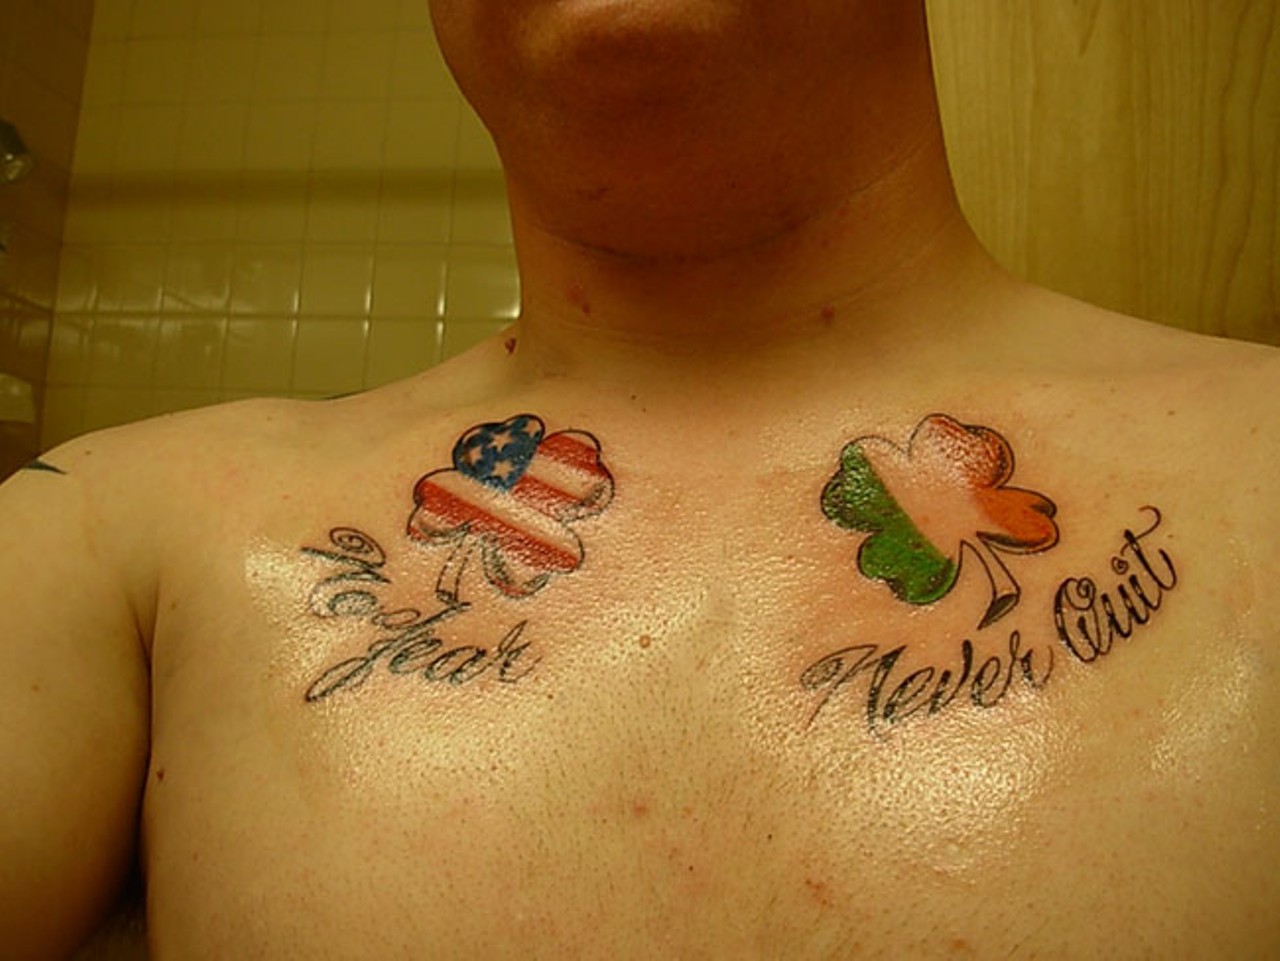 Get a shitty shamrock tattoo that you&#146;ll regret forever....or maybe not.